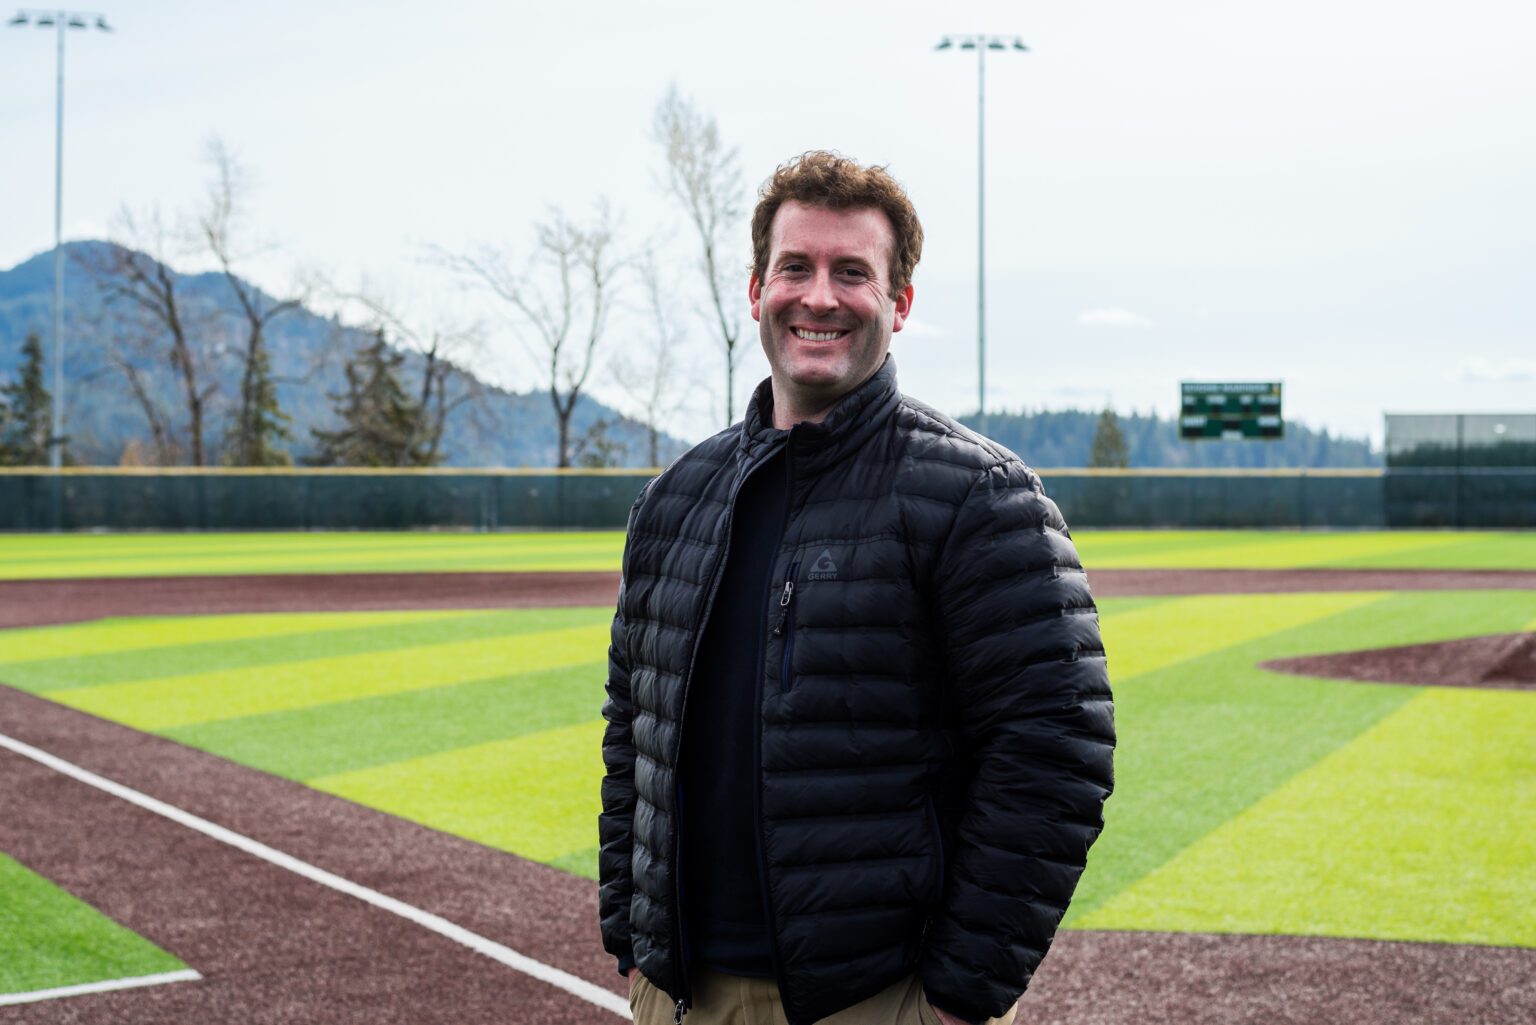 Dane Siegfried stands on the baseball field at Sehome High School with the grassy fields behind him.